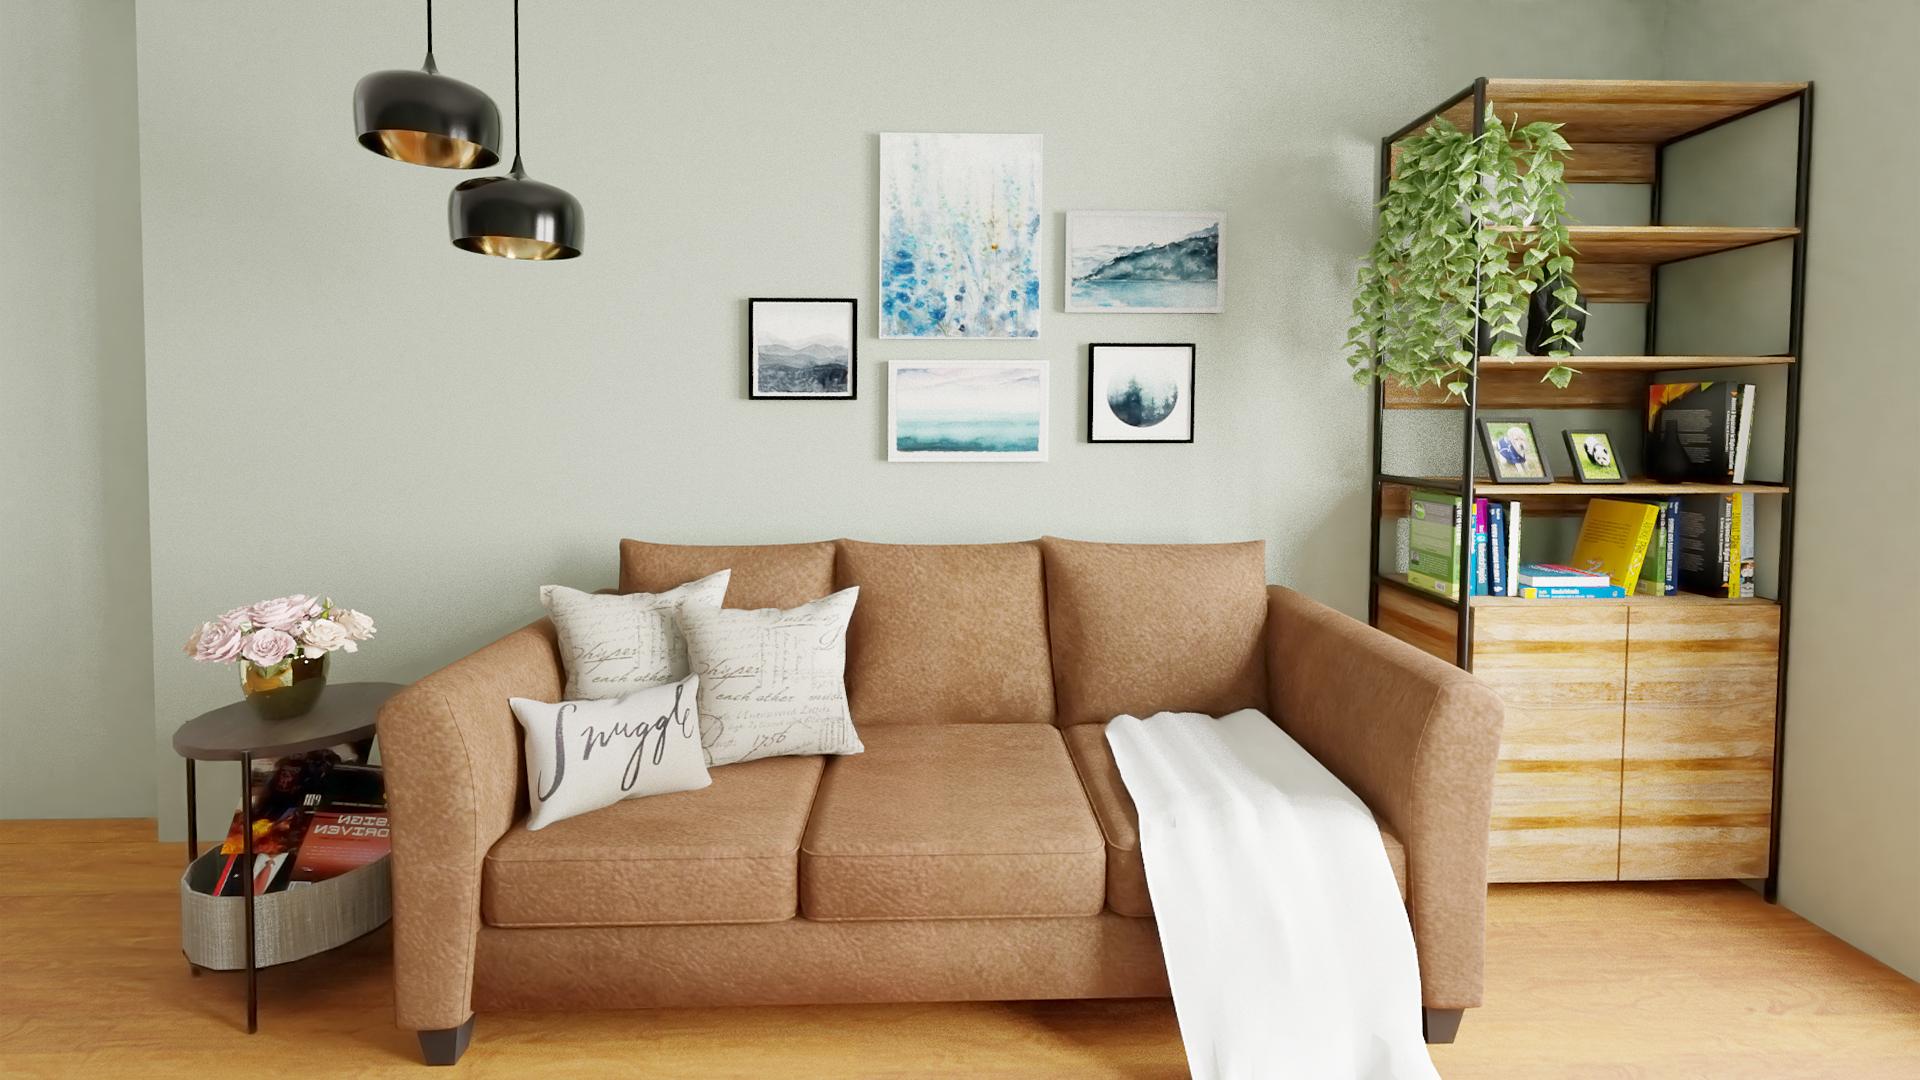 Mastering the Art of Decorating Small Spaces: Urban Farmhouse Living Room